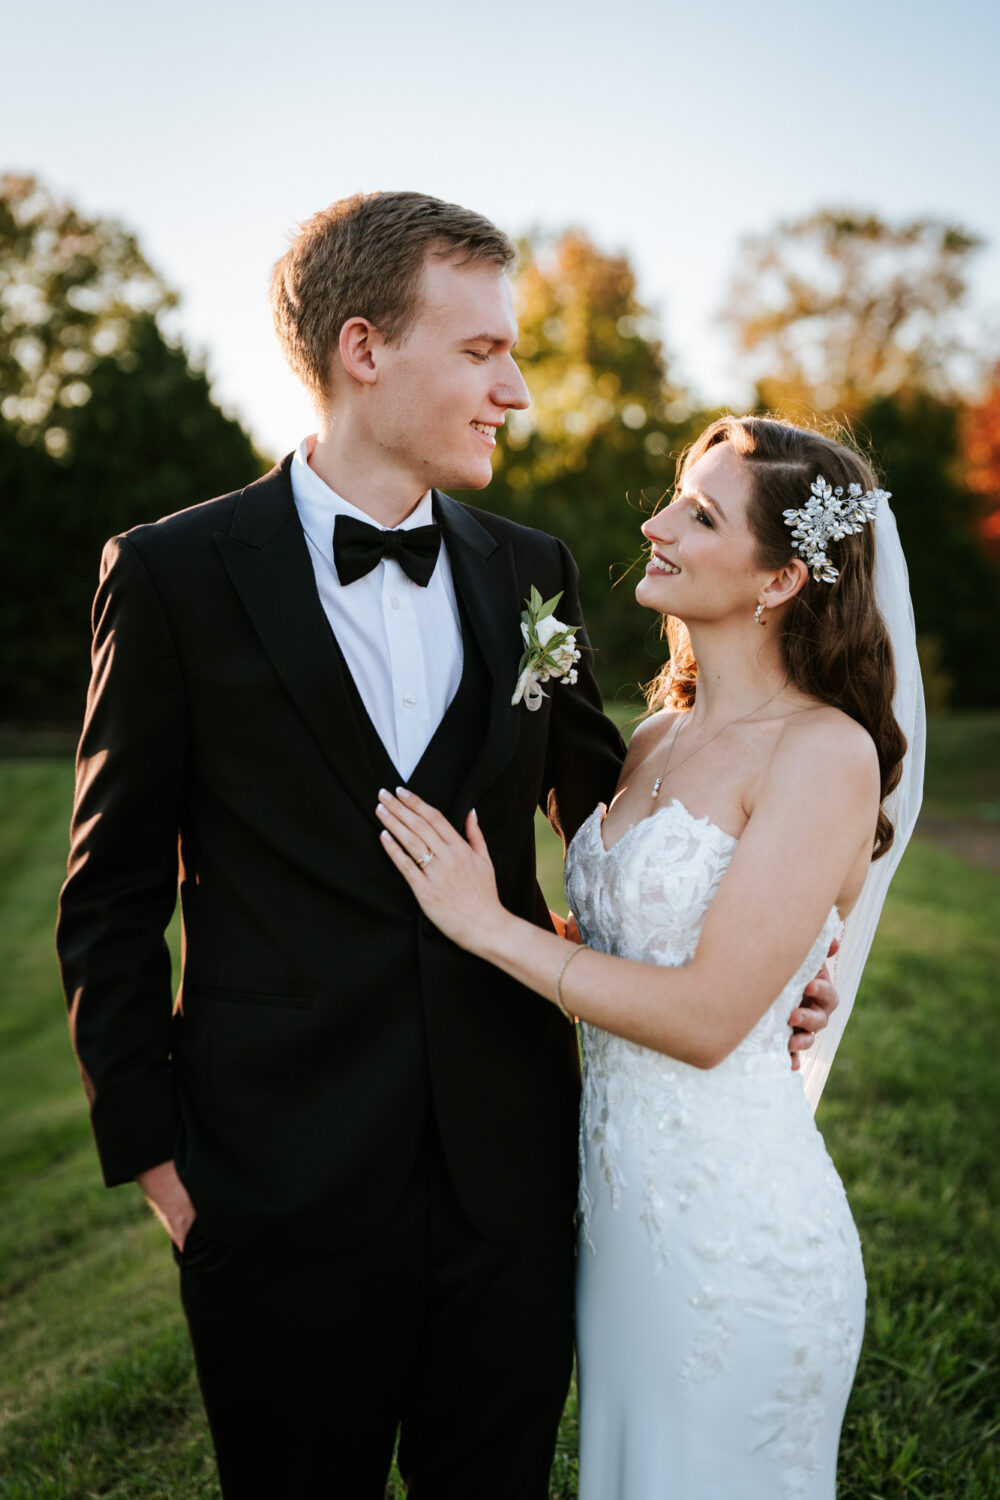 bride and groom share a moment together and smile at each other on their middleburg barn wedding day